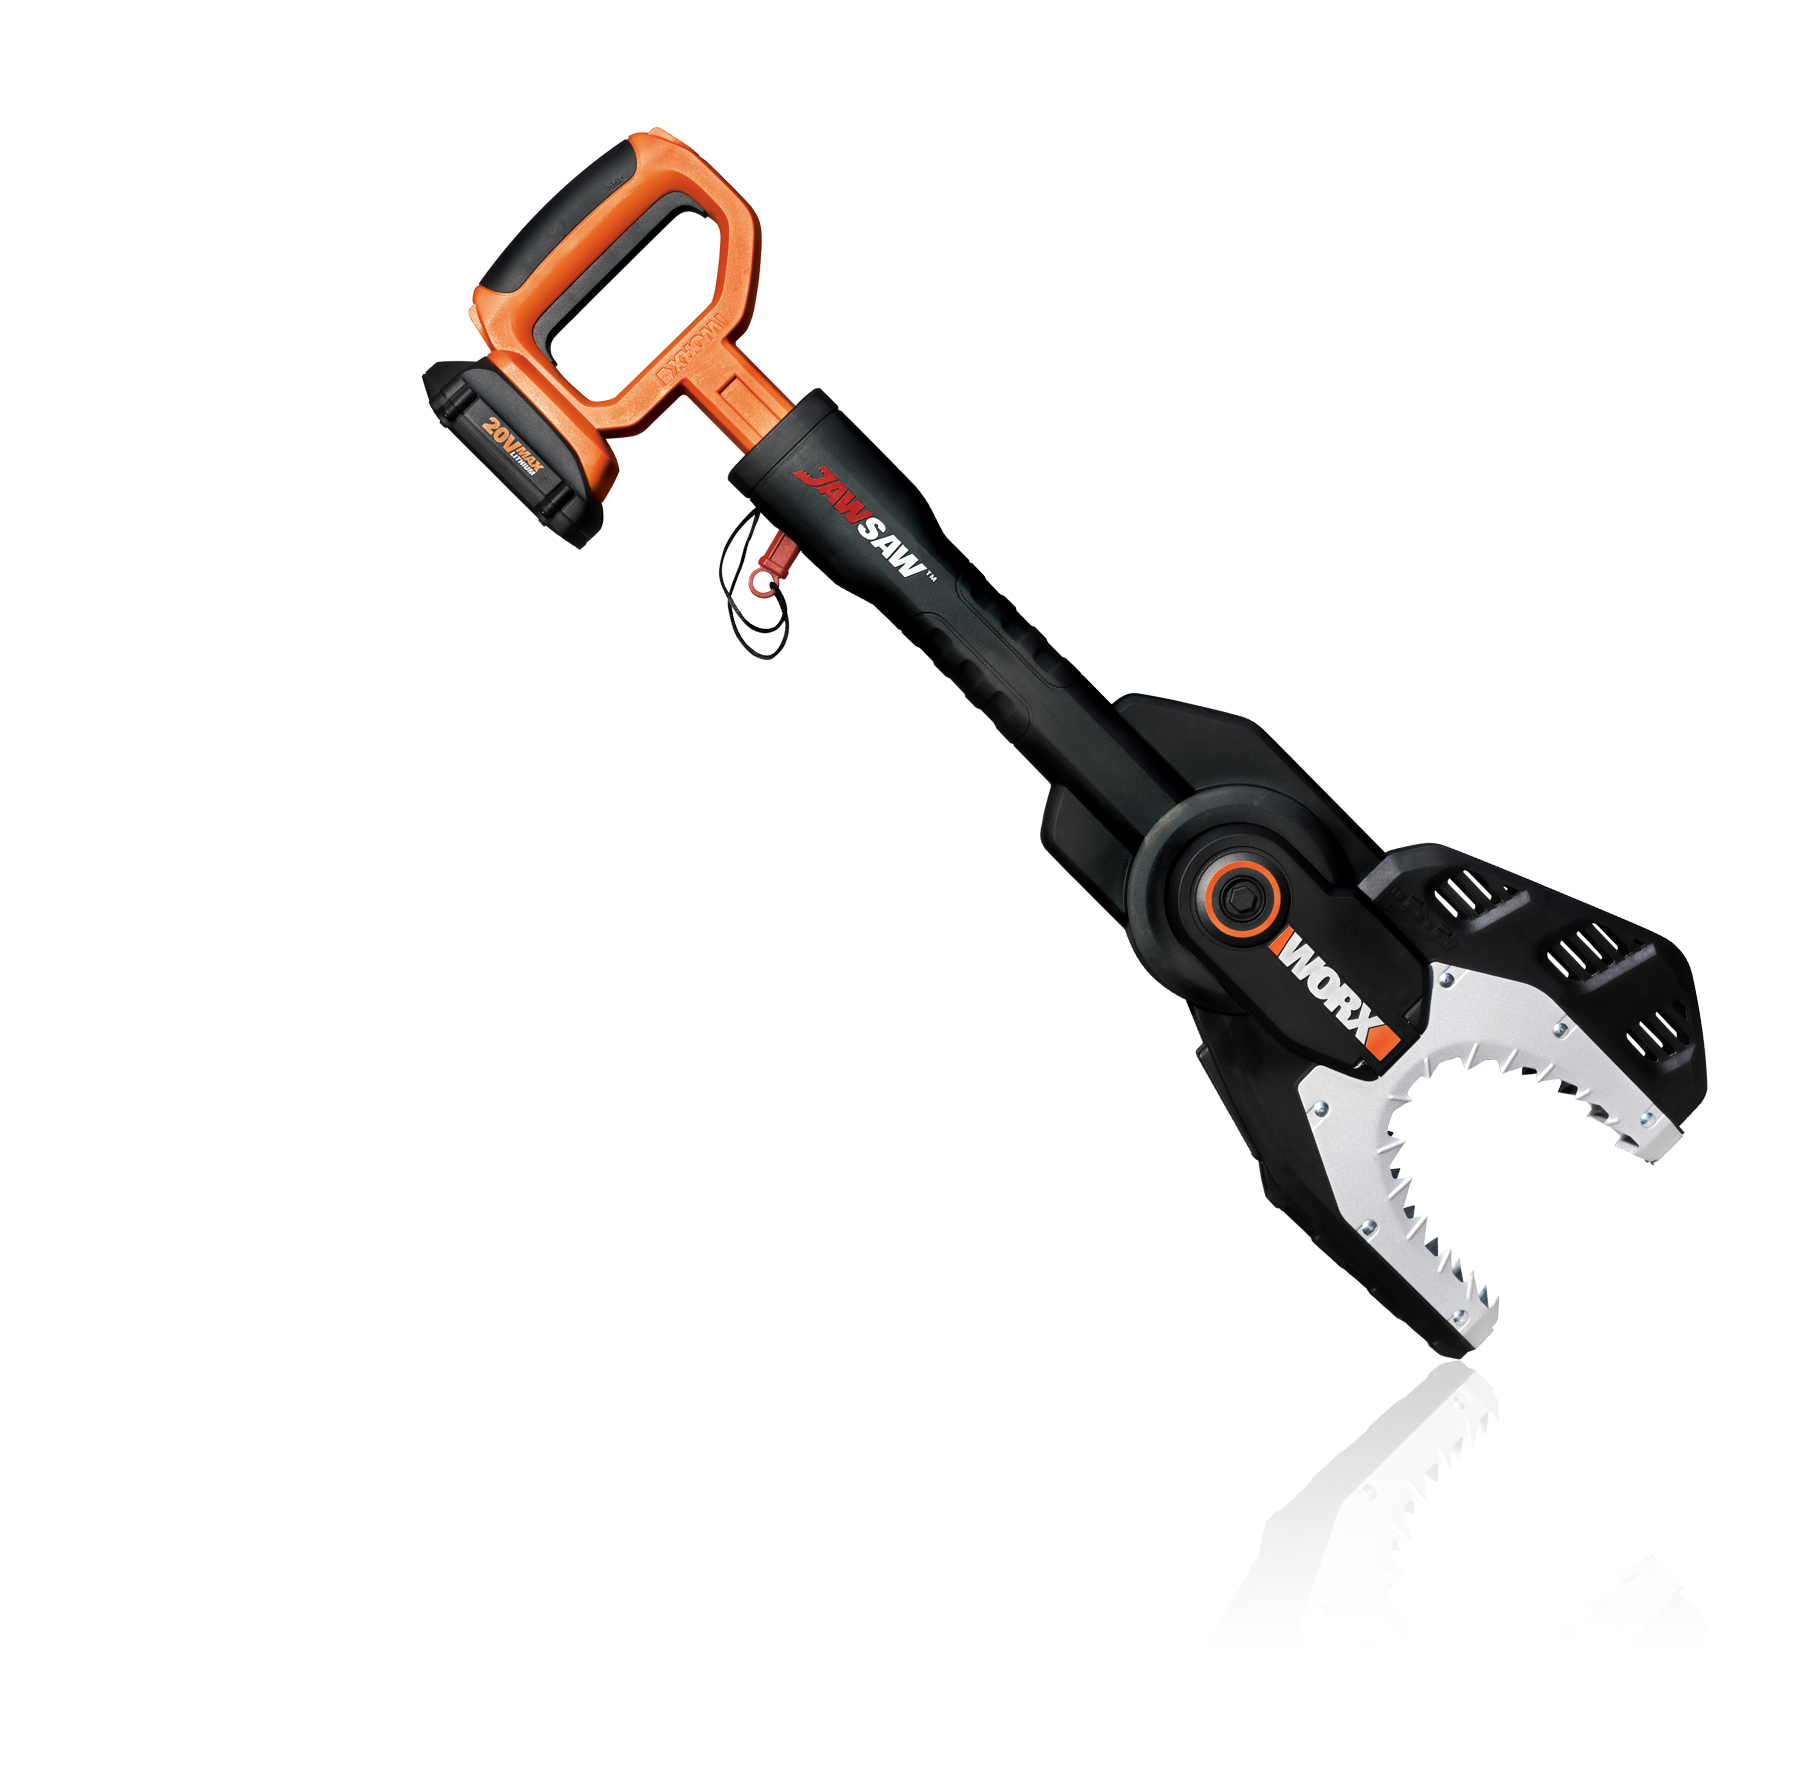 WORX 20V MaxLithium JawSaw cuts  branches up to 4 inches in diameter.